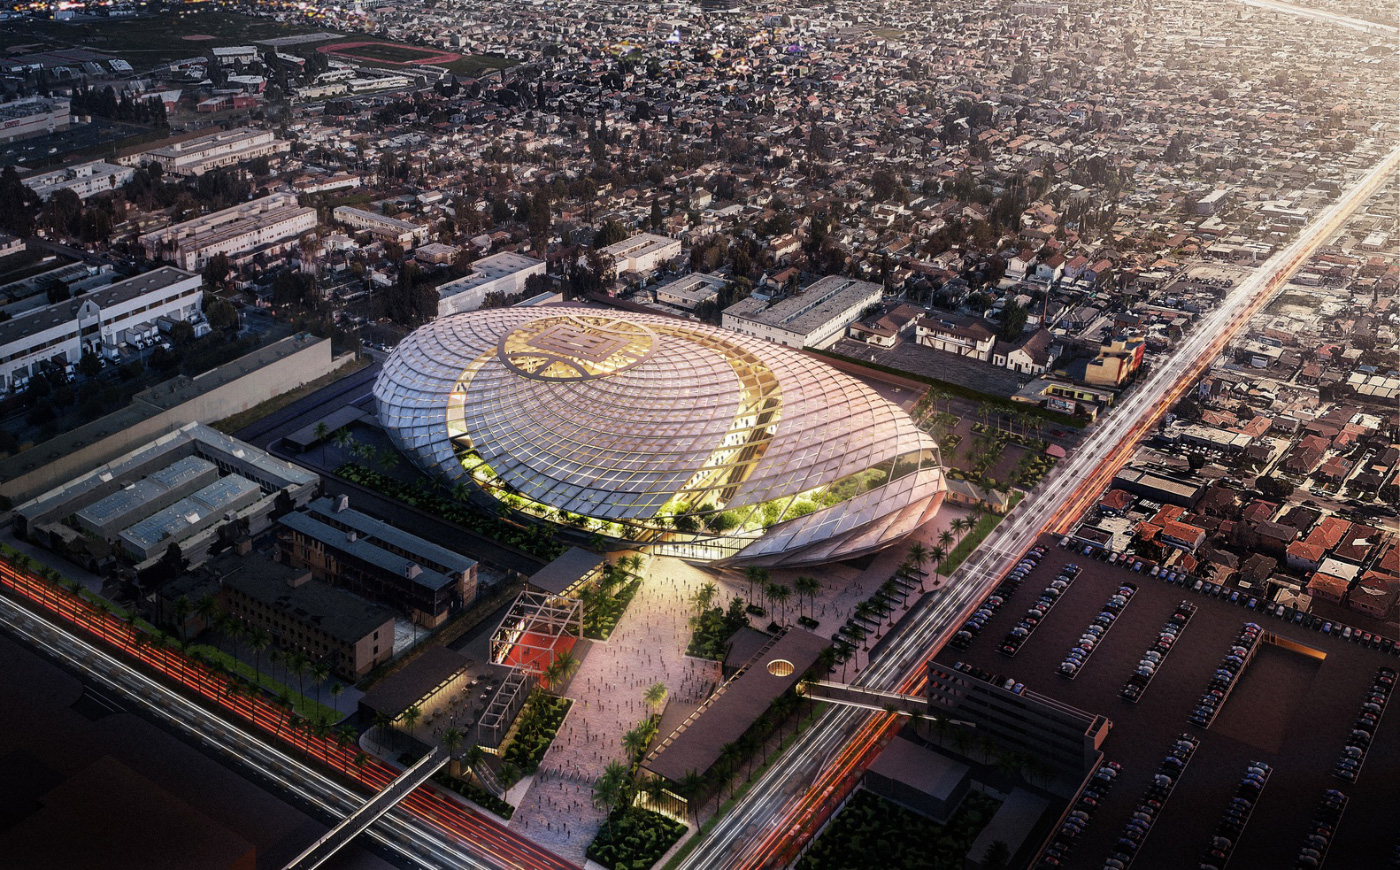 Renderings revealed for the Clippers' new net-shaped stadium - Archpaper.com